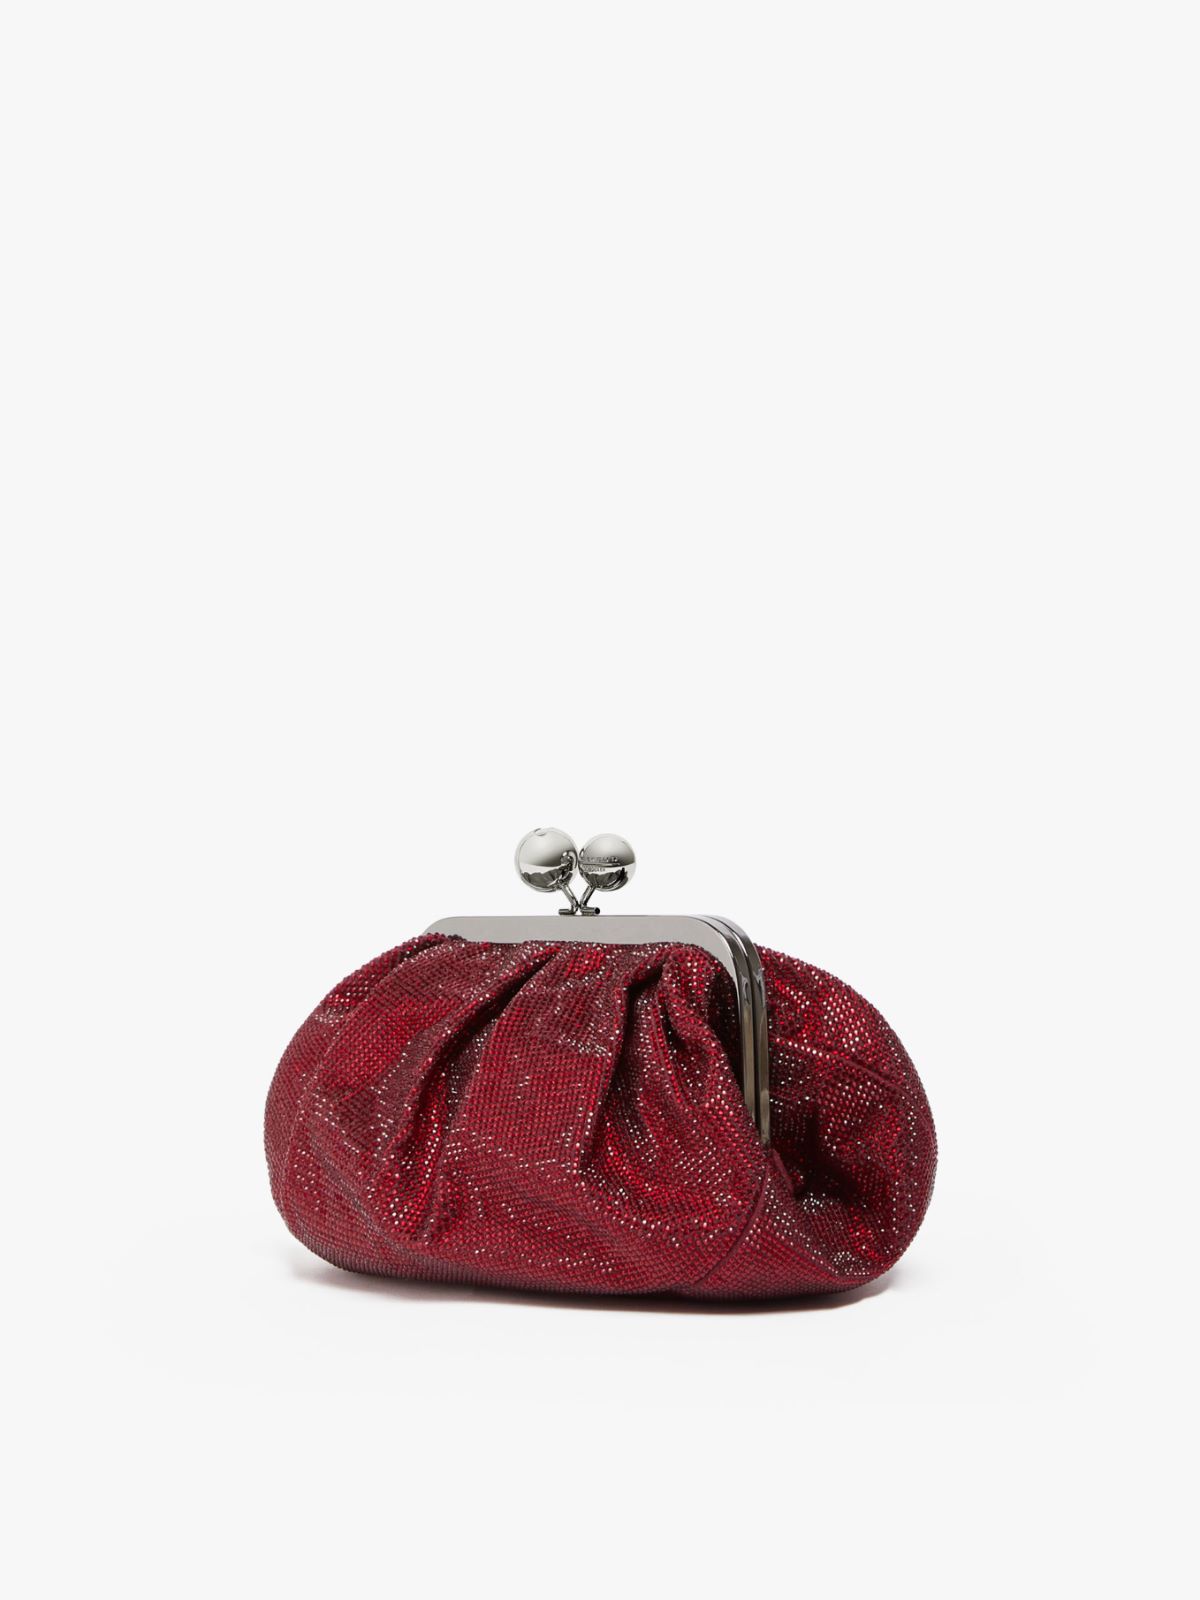 Pasticcino Bag Small in strass - ROSSO - Weekend Max Mara - 2